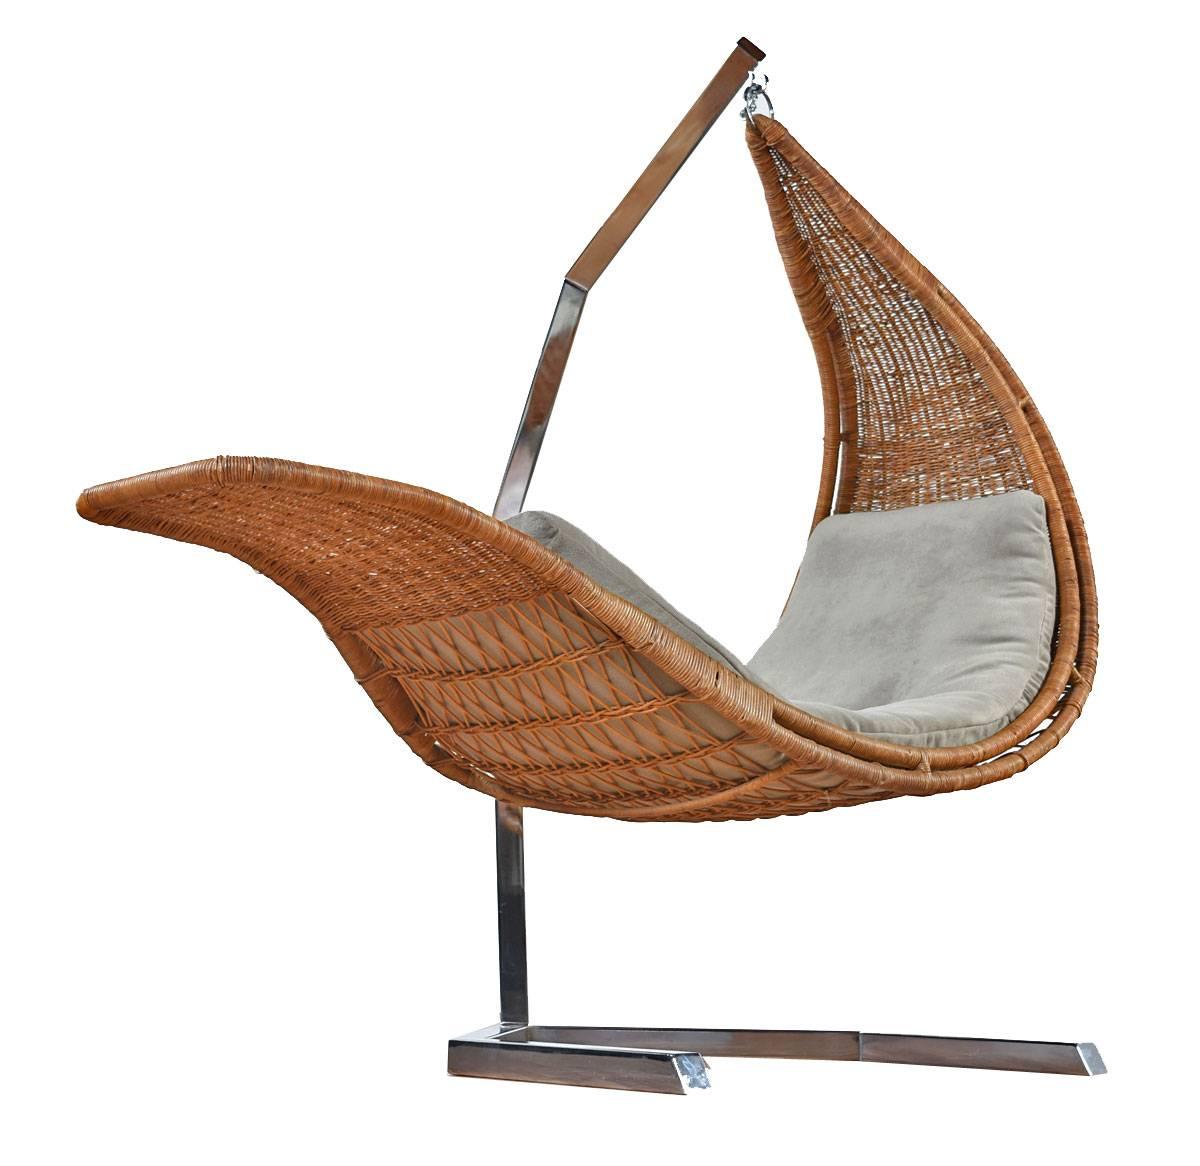 Easily one of the more interesting pieces that we've had the pleasure to present at Furnish Me Vintage. This custom, studio created, wicker chaise longue hangs from a modern chrome steel pillar. The piece is stunning to look at, but also very